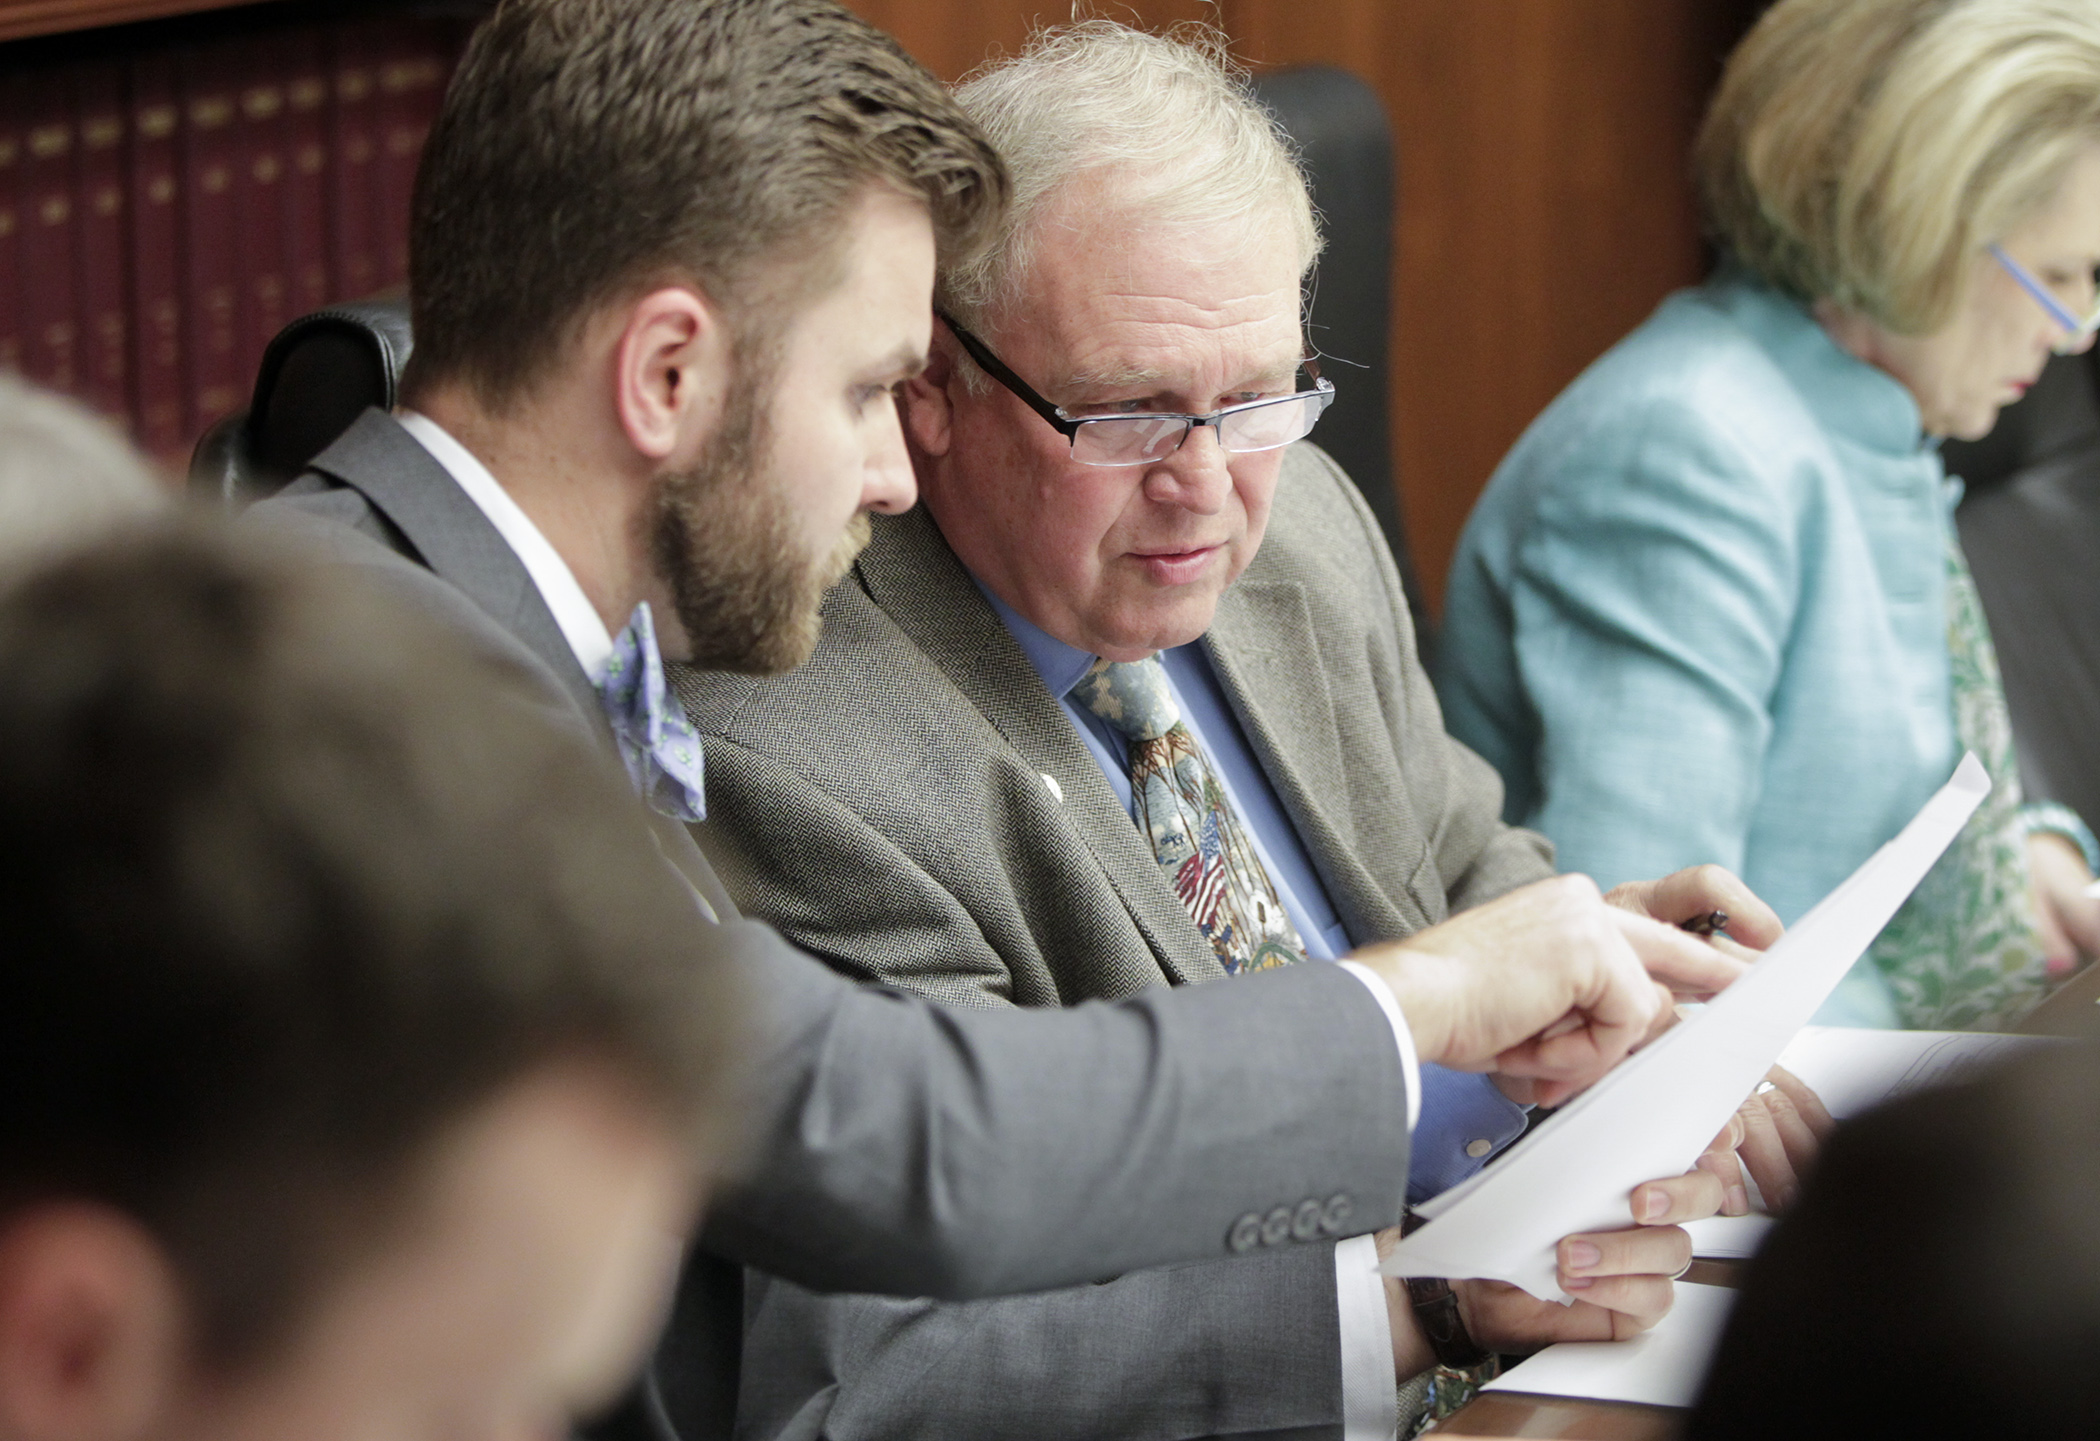 Rep. Dean Urdahl, chair of the House Capital Investment Committee, confers with Committee Administrator Gavin Hanson May 4 as the committee begins to take public testimony on its omnibus bill. Photo by Paul Battaglia